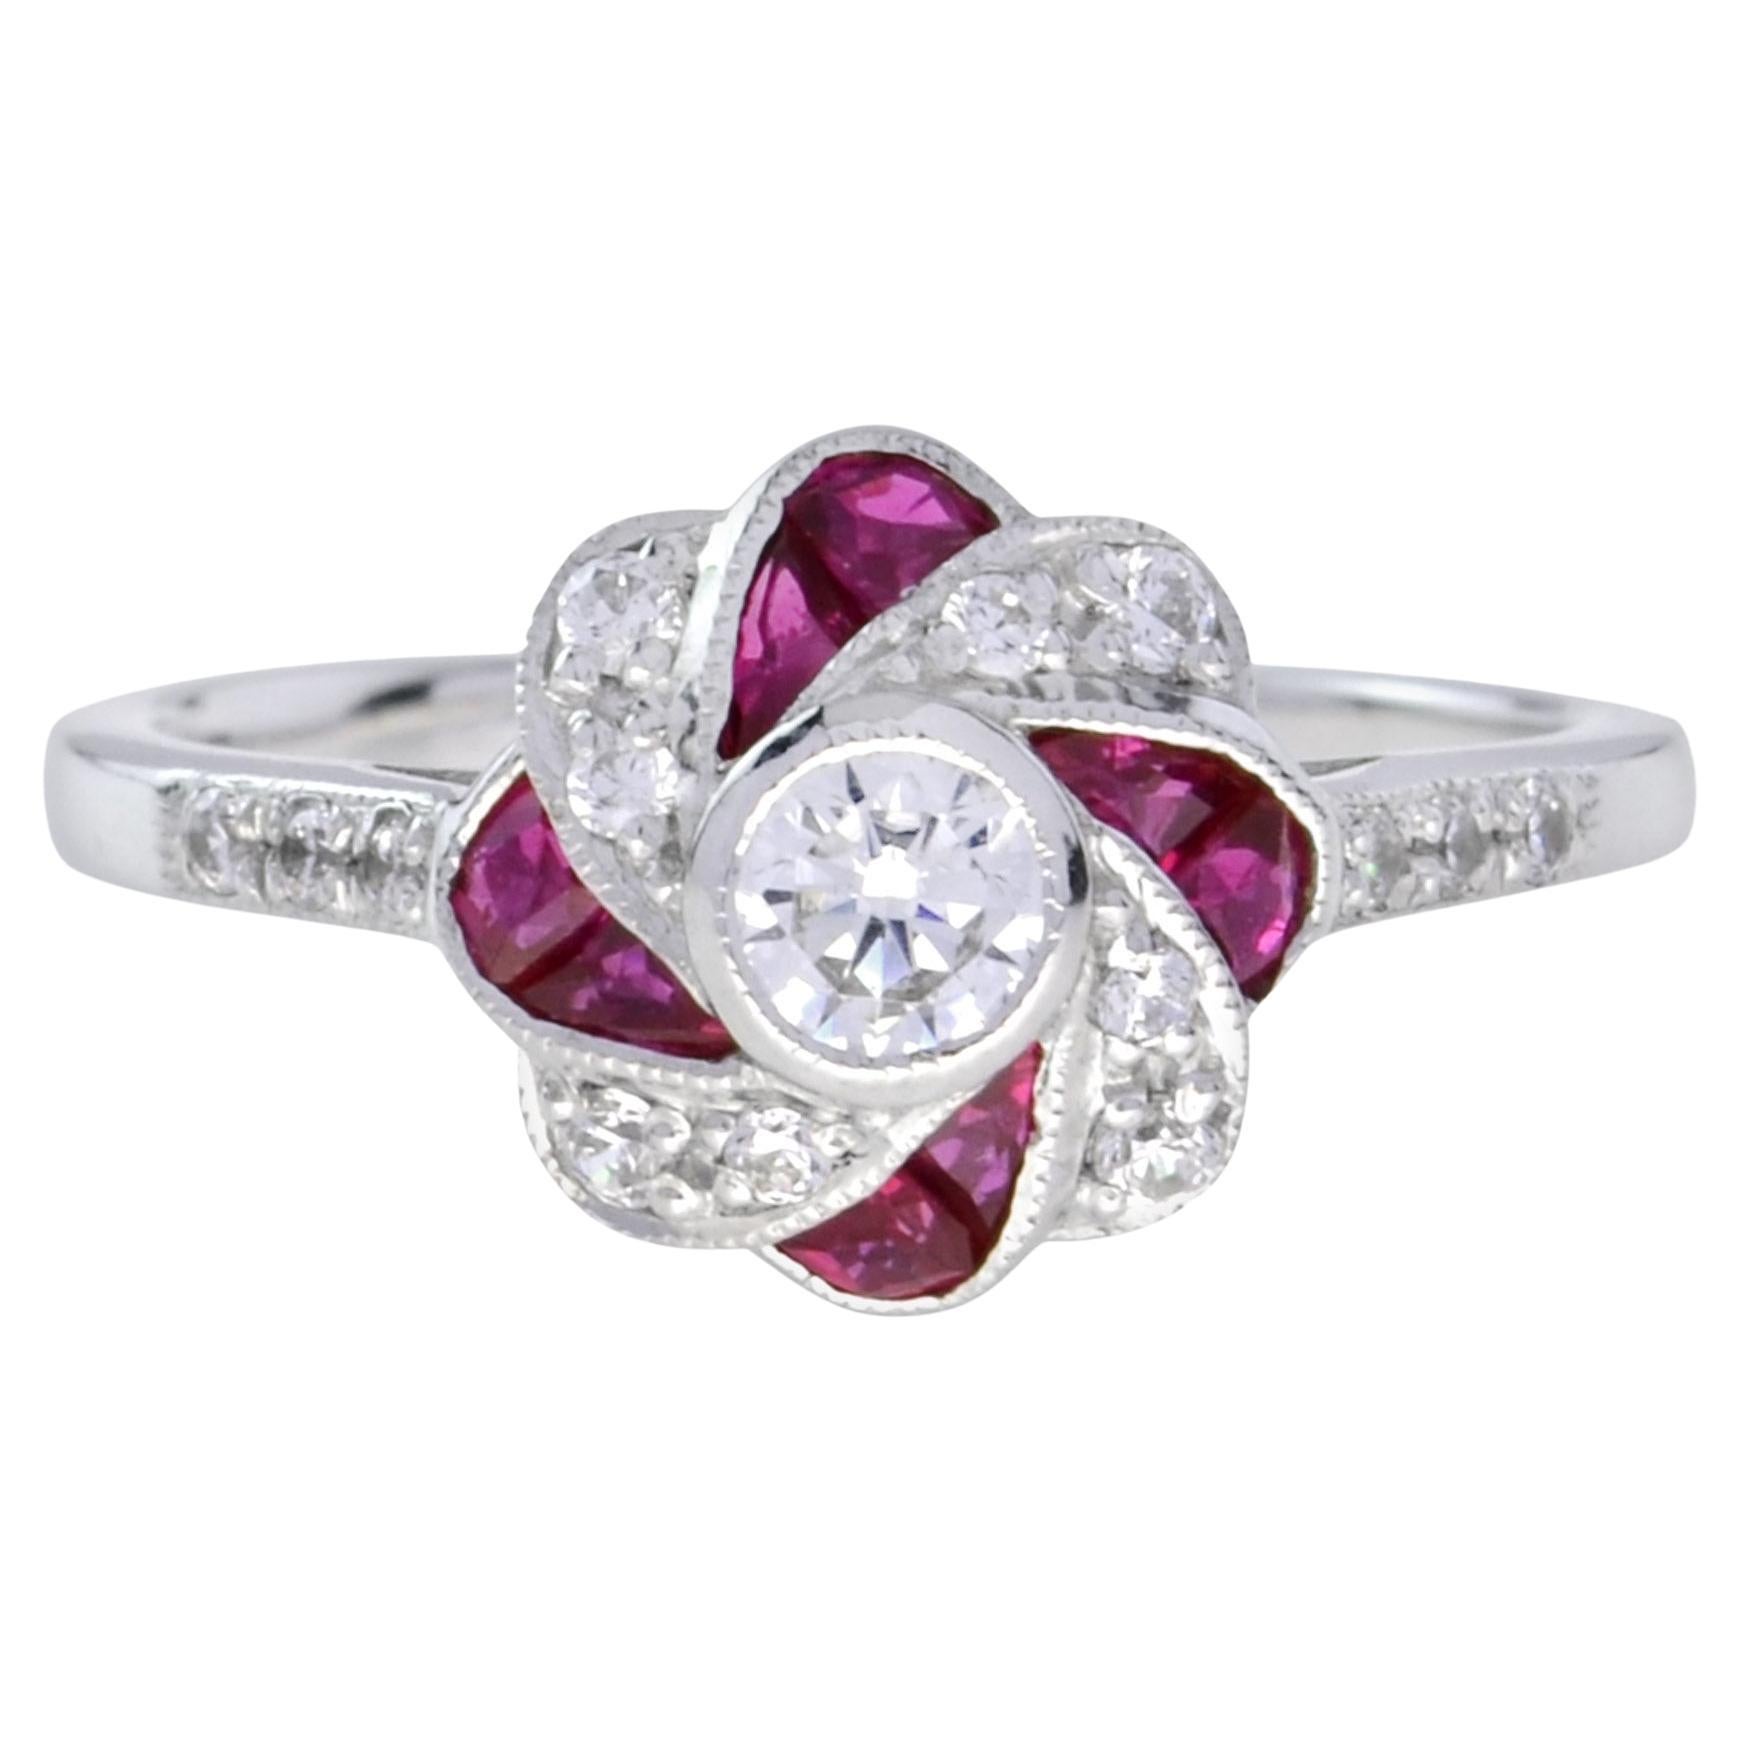 Art Deco Style Diamond and Ruby Floral Engagement Ring in 18K White Gold